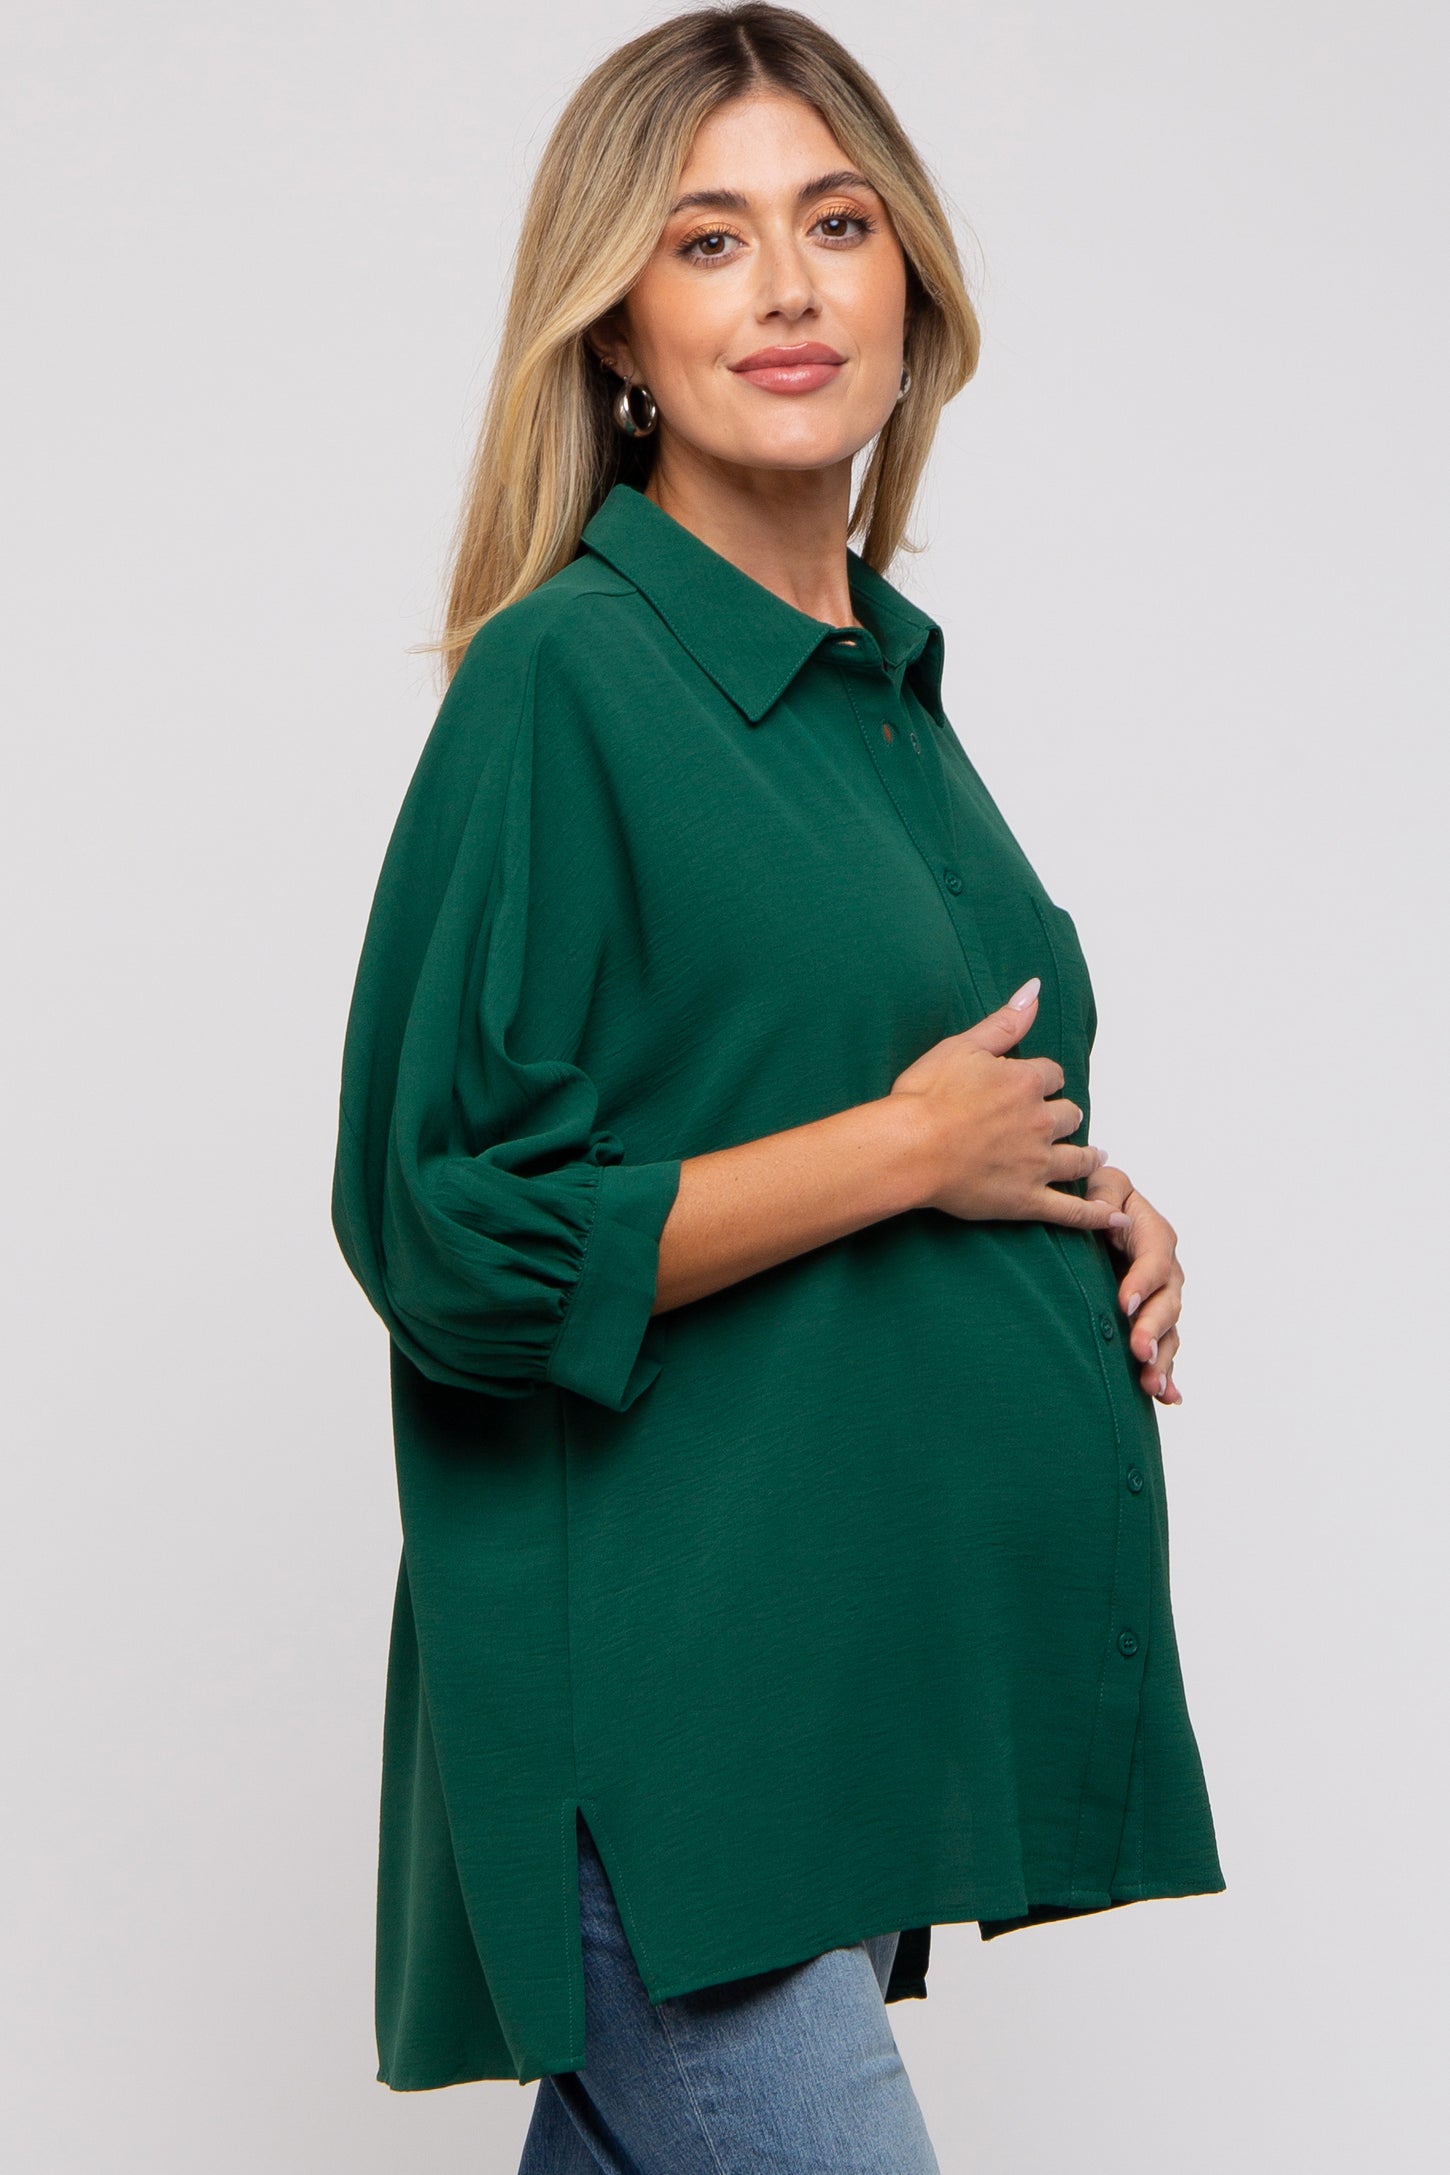 Forest Green Button Down 3/4 Sleeve Maternity Top